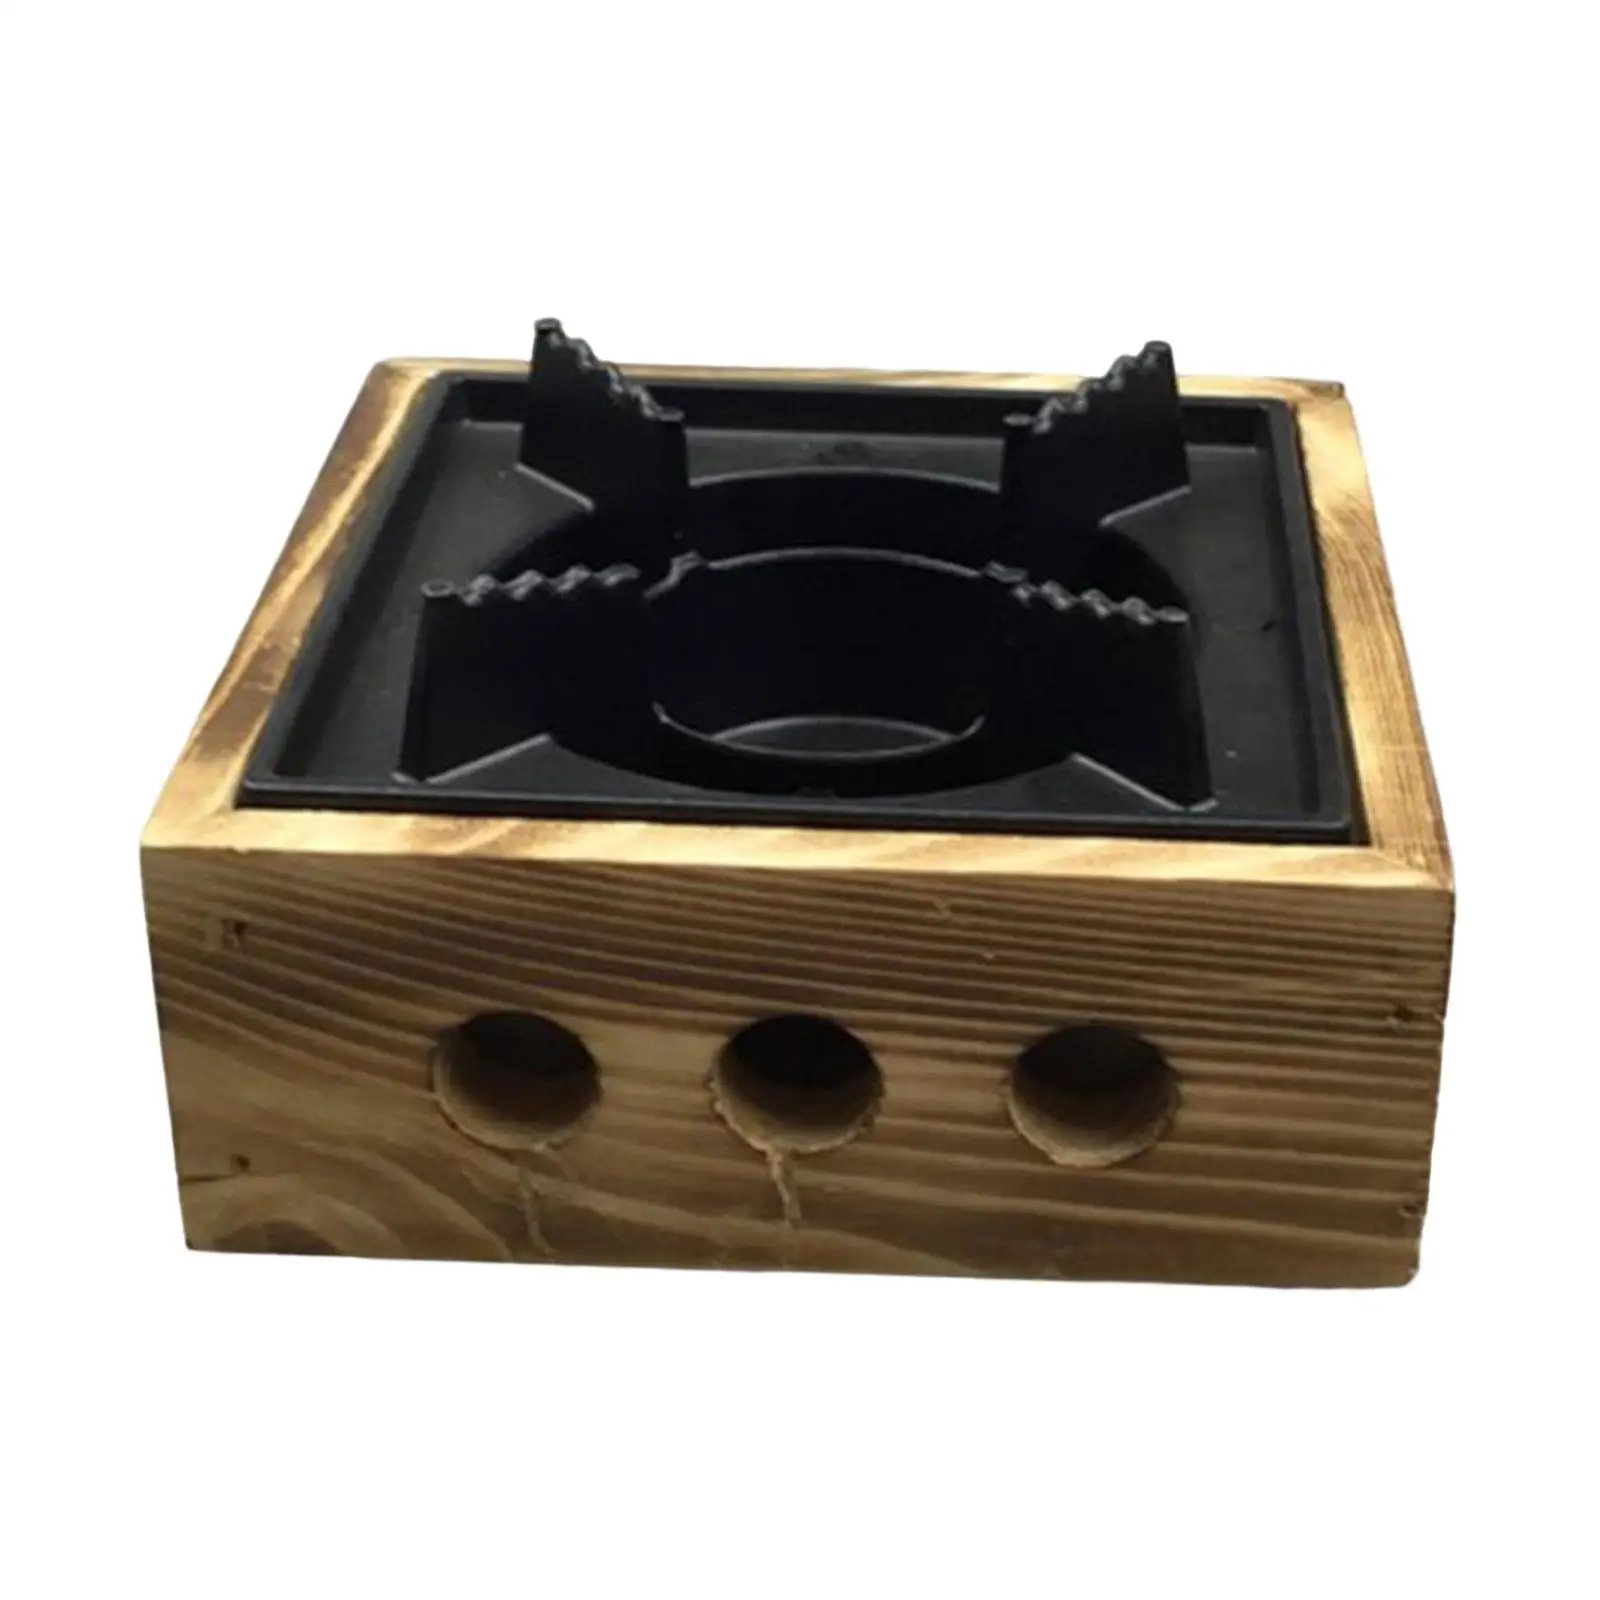 Compact Alcohol Stoves Stew Hot Pot with Wooden Base Solid Alcohol Stoves Lightweight Spirit Burner for Camping Backpacking